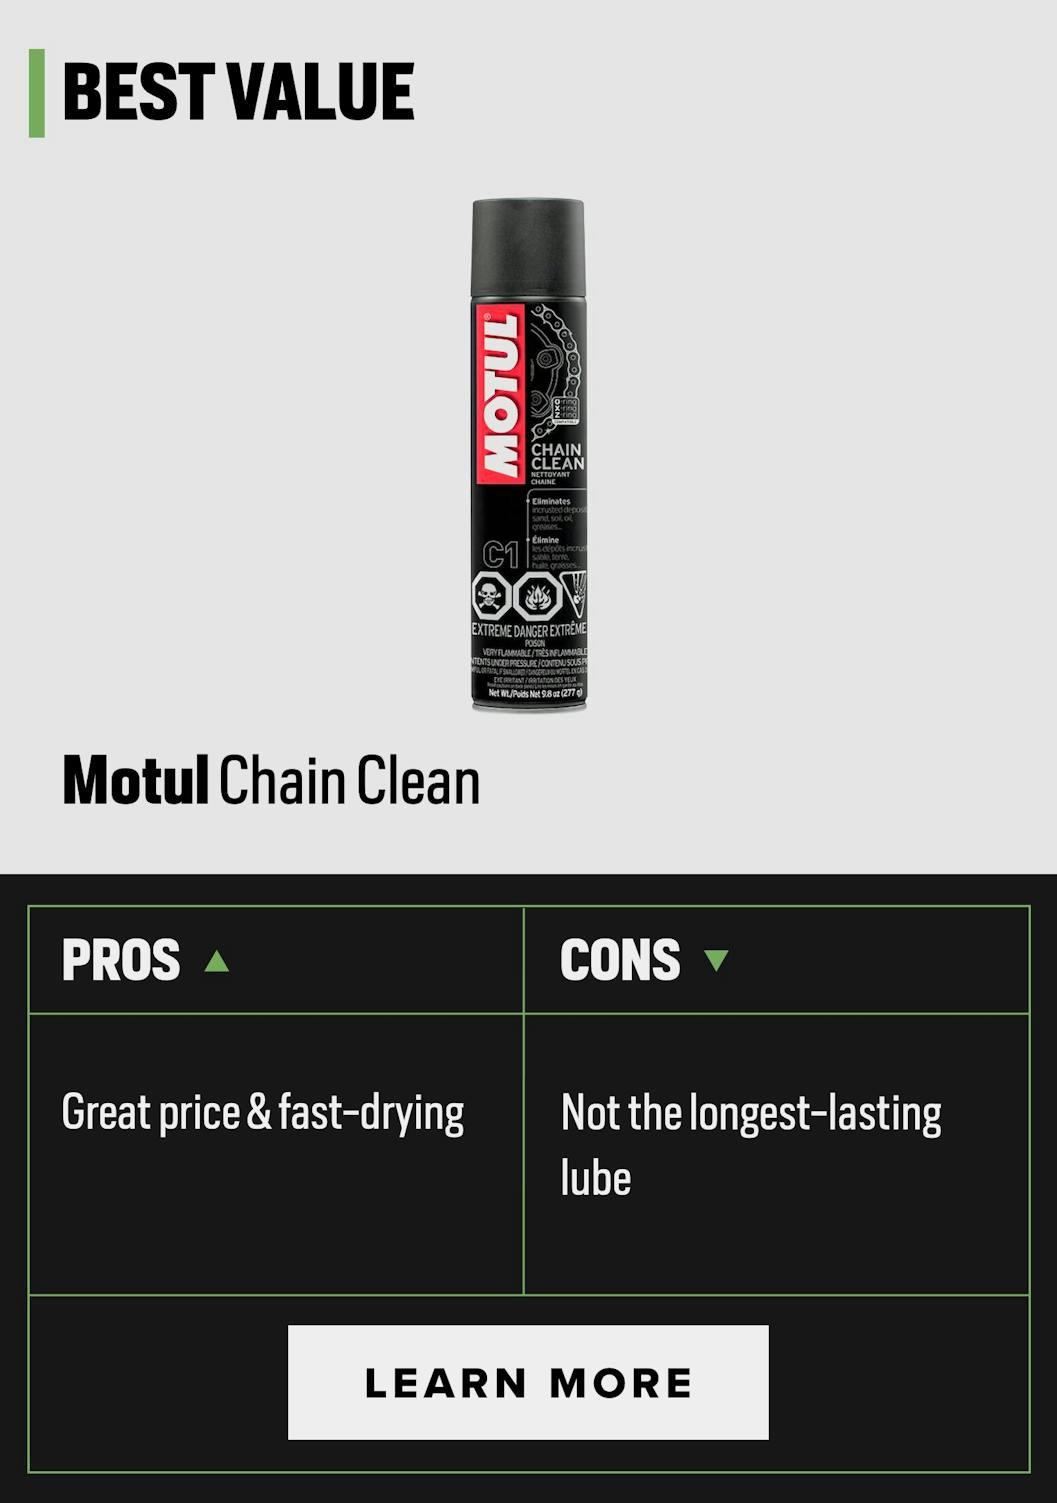 Chain Lubricant for Motorcycle Chain Gear Oil Lube Motorbike Scooter Chian  Lube Agent Motorcycle Accessories Prevent Rust Dirt